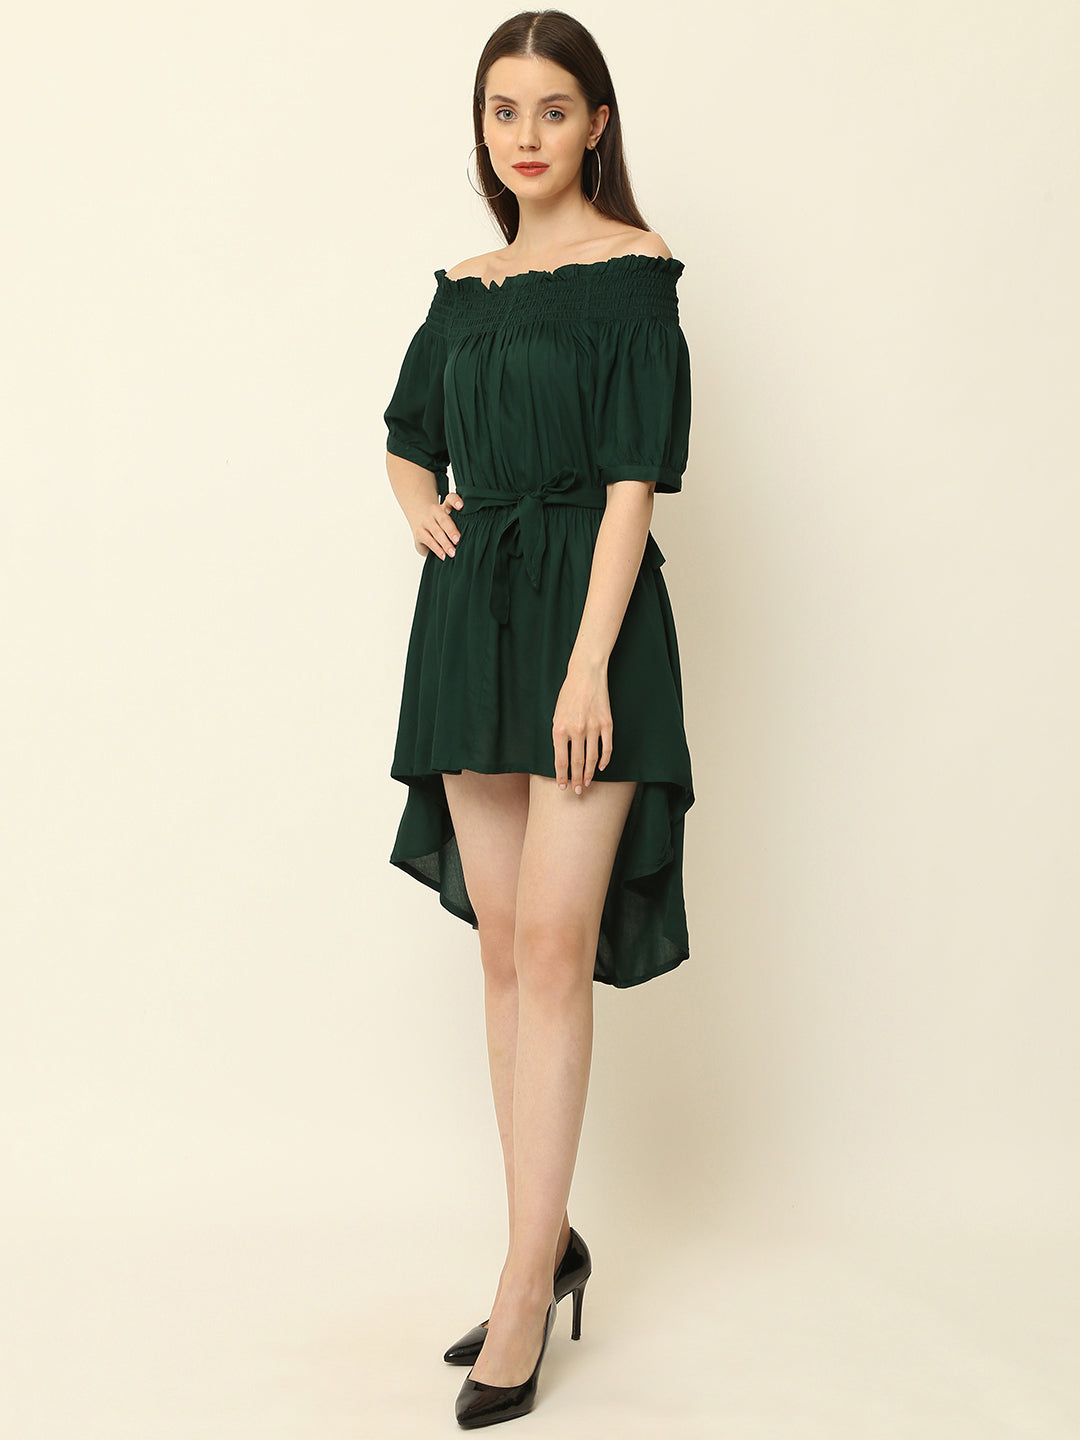 Bottole Green Off Shoulder High Low One Piece Dress